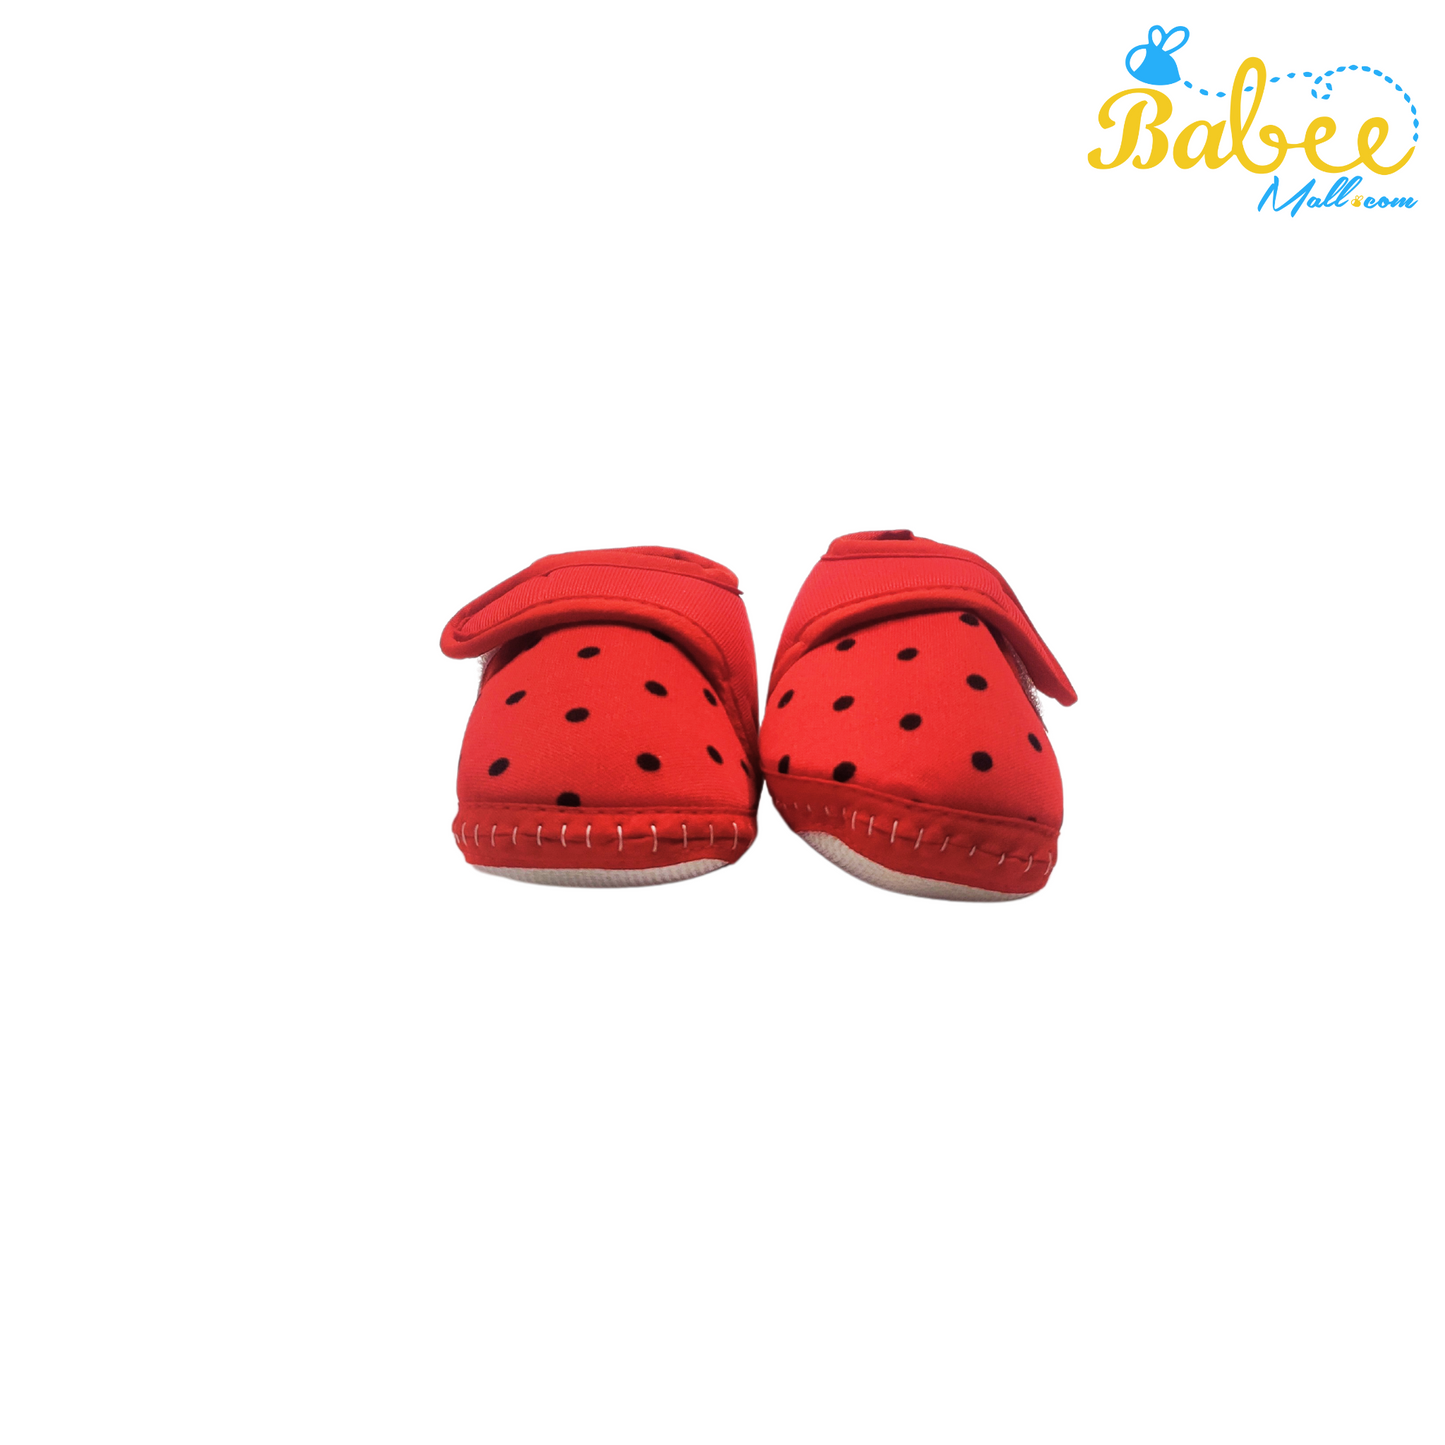 Stylish Newborn Baby Shoes - The Perfect First Steps in Style and Comfort 0-12 Month's (Red Dot)